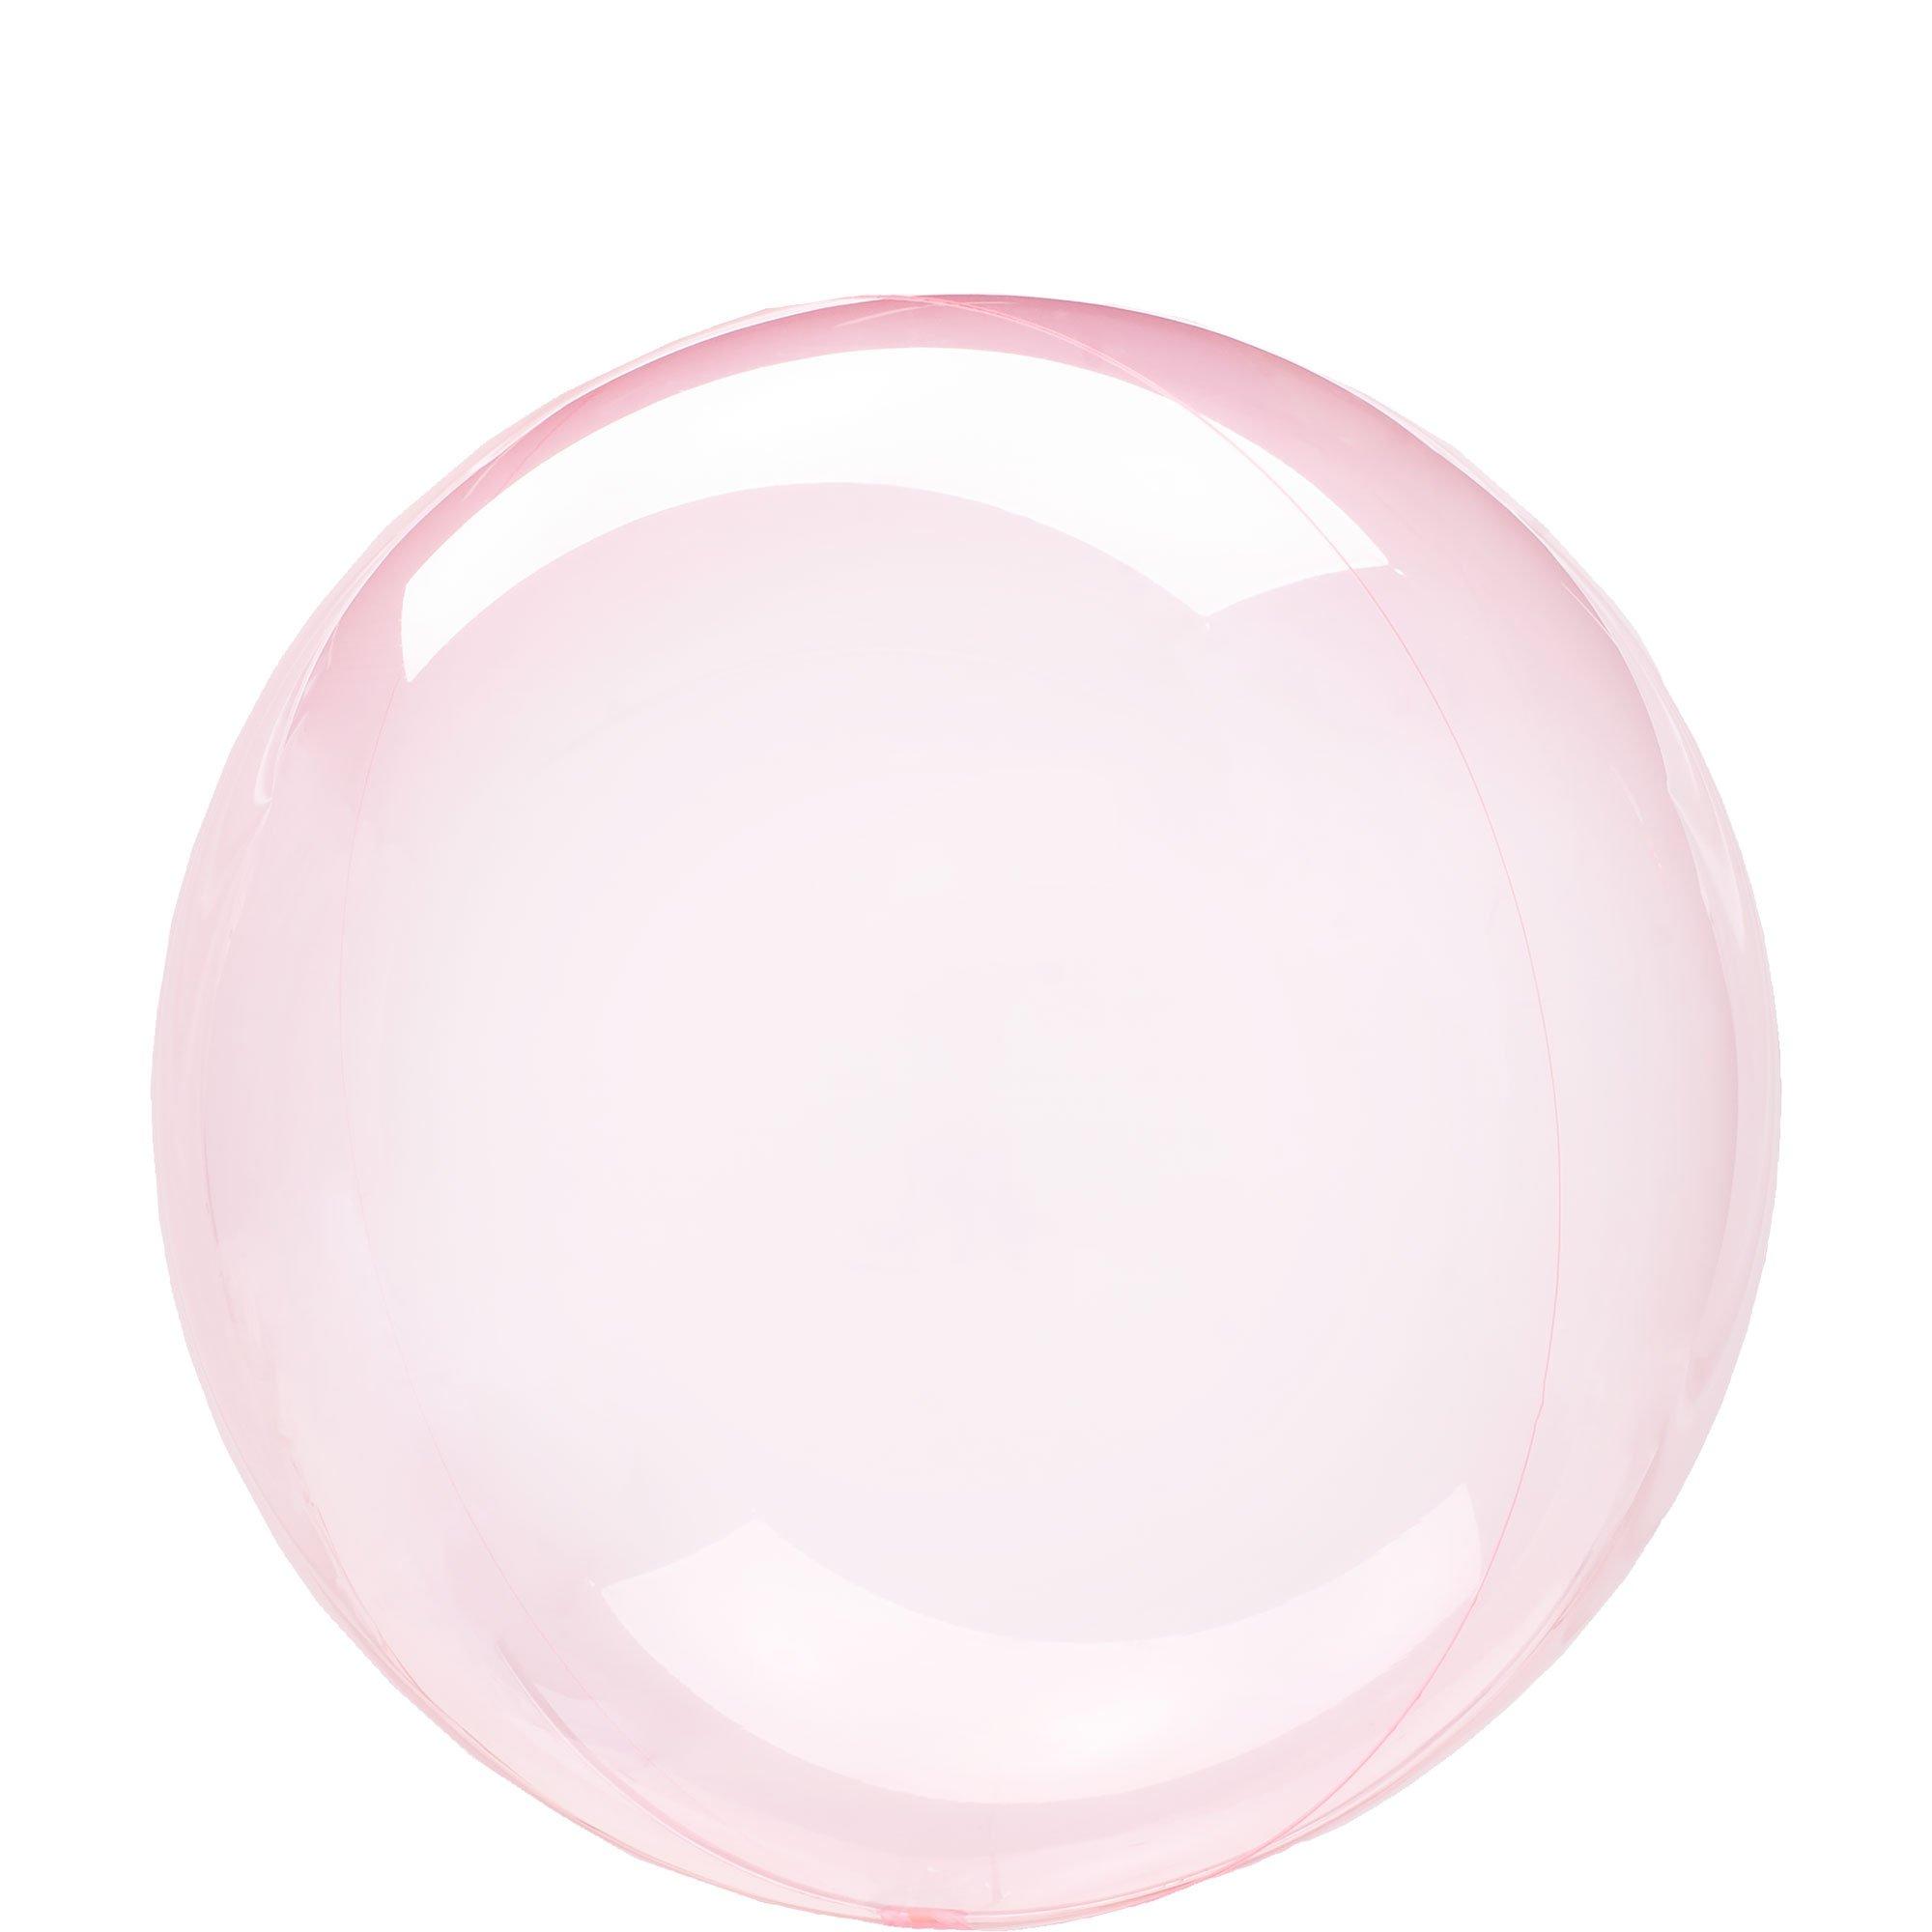 Clear Dark Pink Plastic Balloon, 18in - Crystal Clearz™